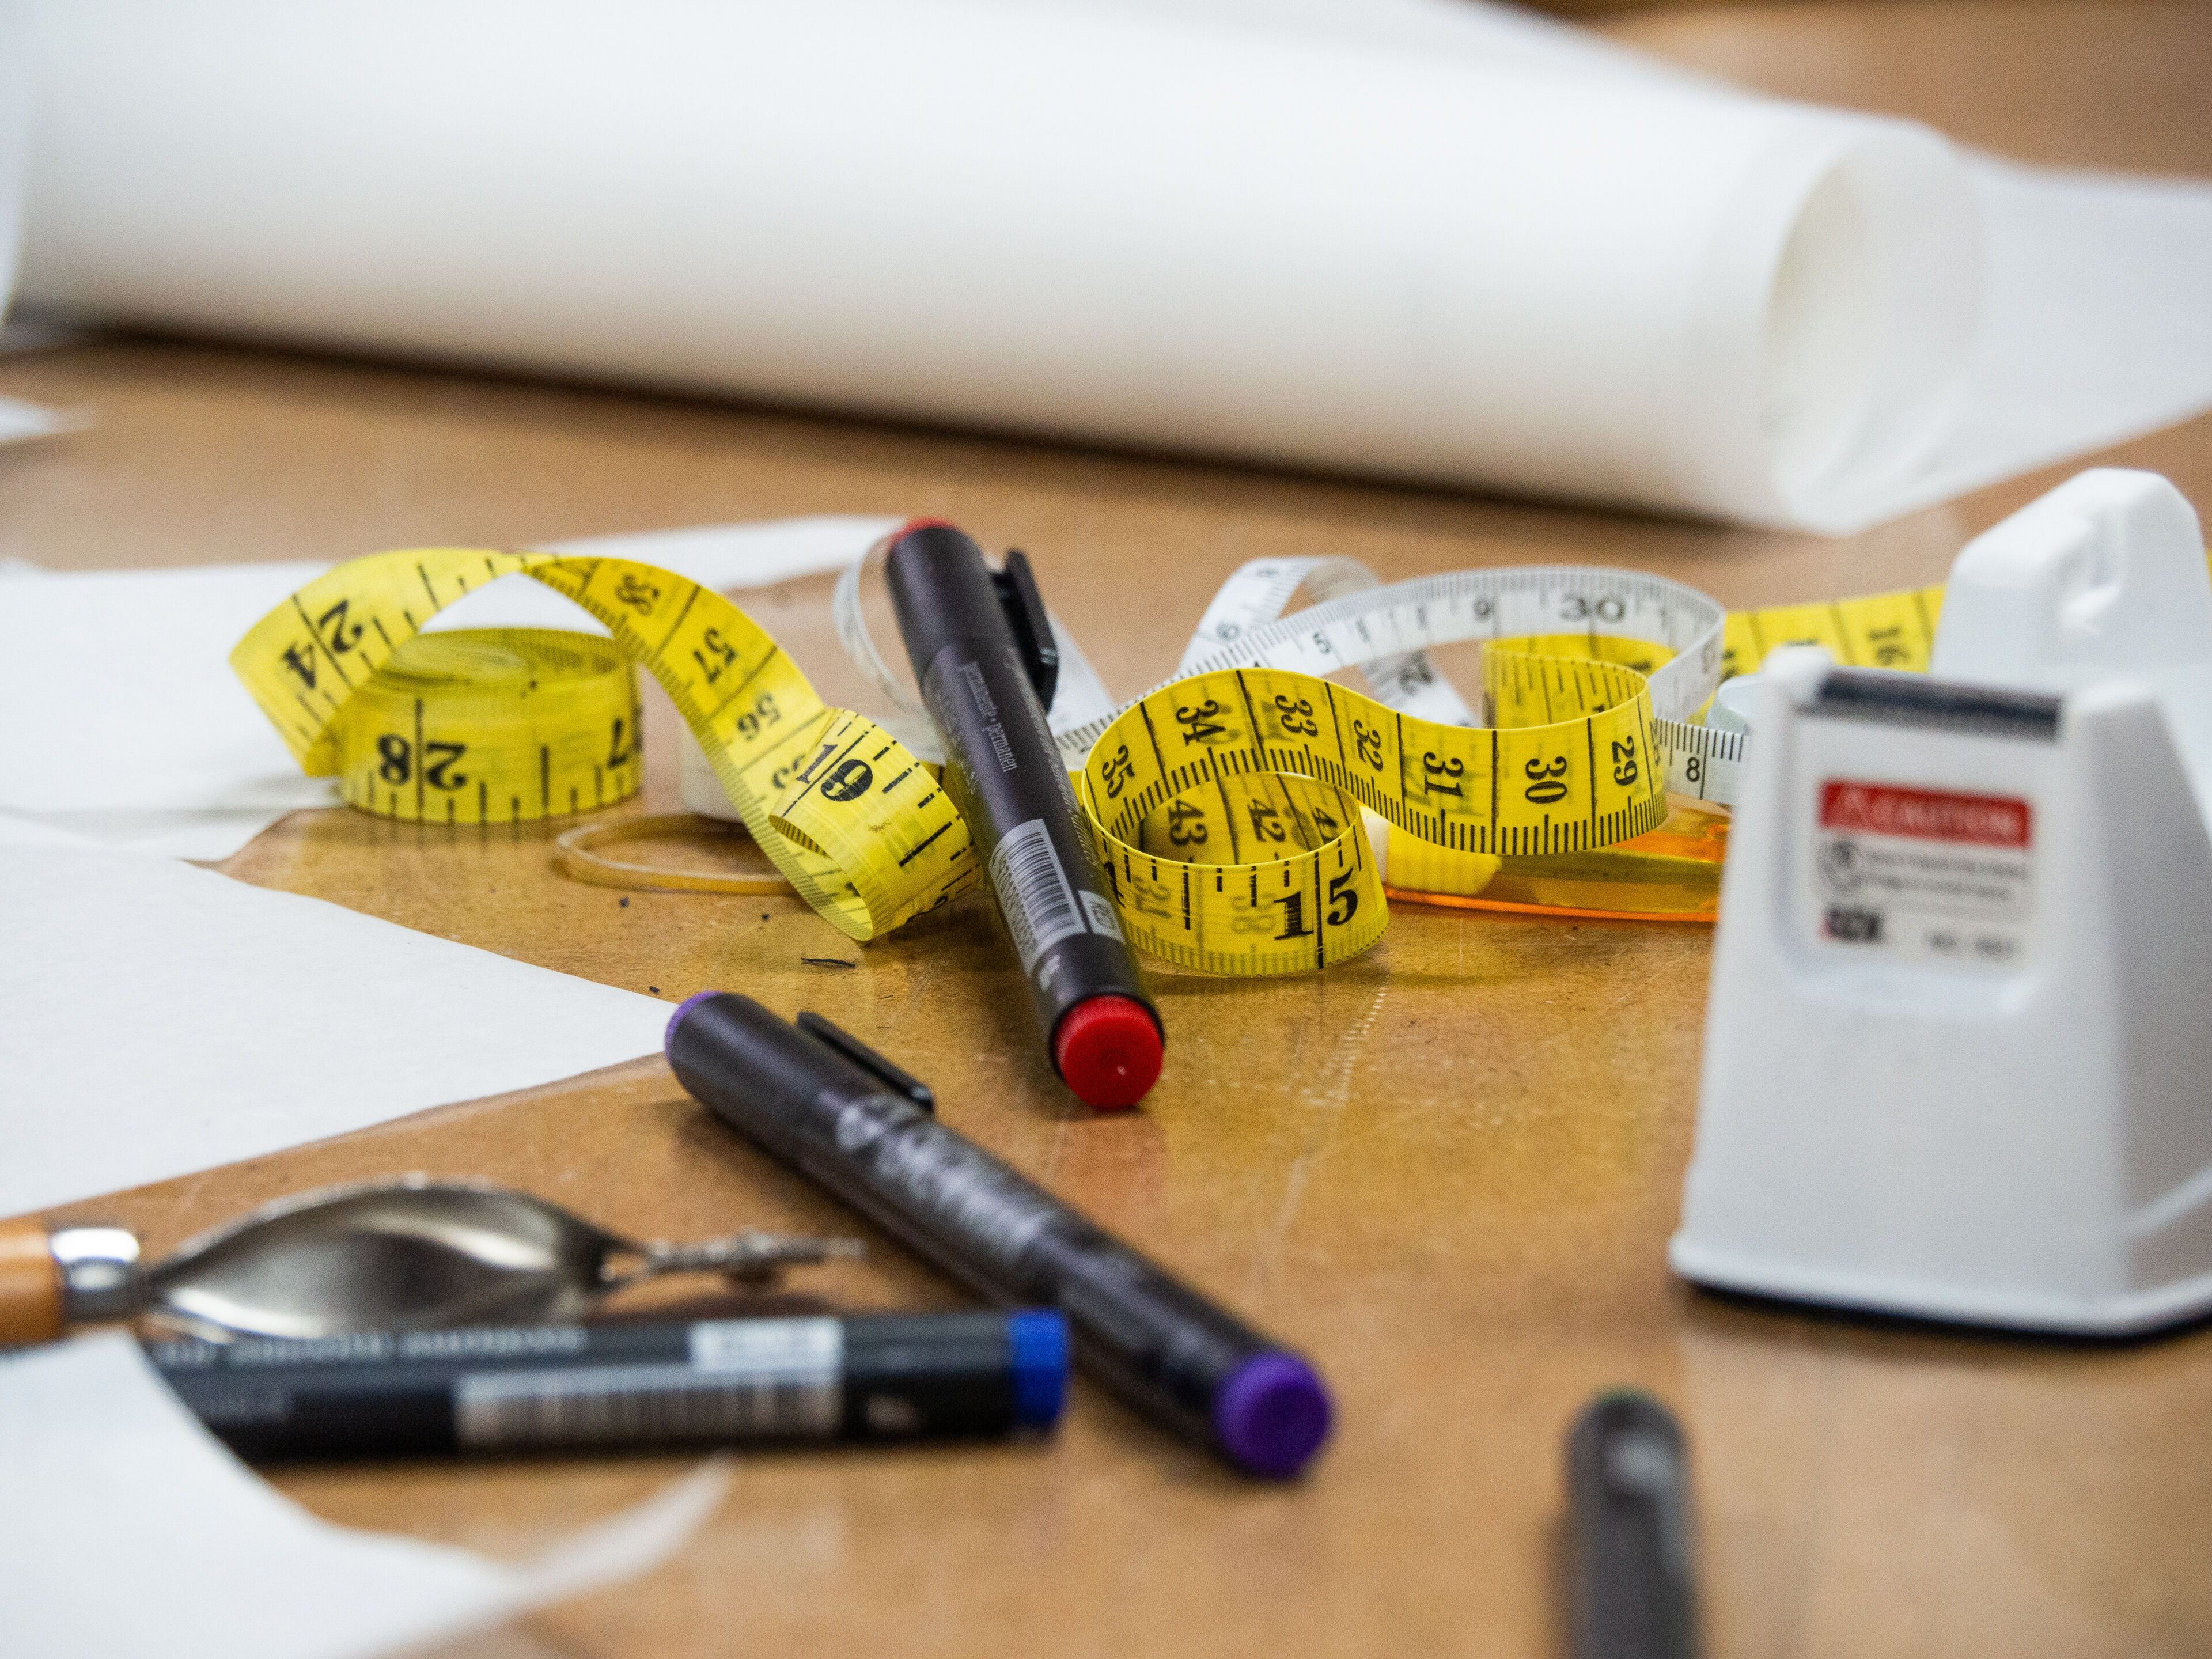 Various tailoring tools, including measuring tapes, markers, and scissors, arranged on a wooden worktable with rolls of paper in the background.